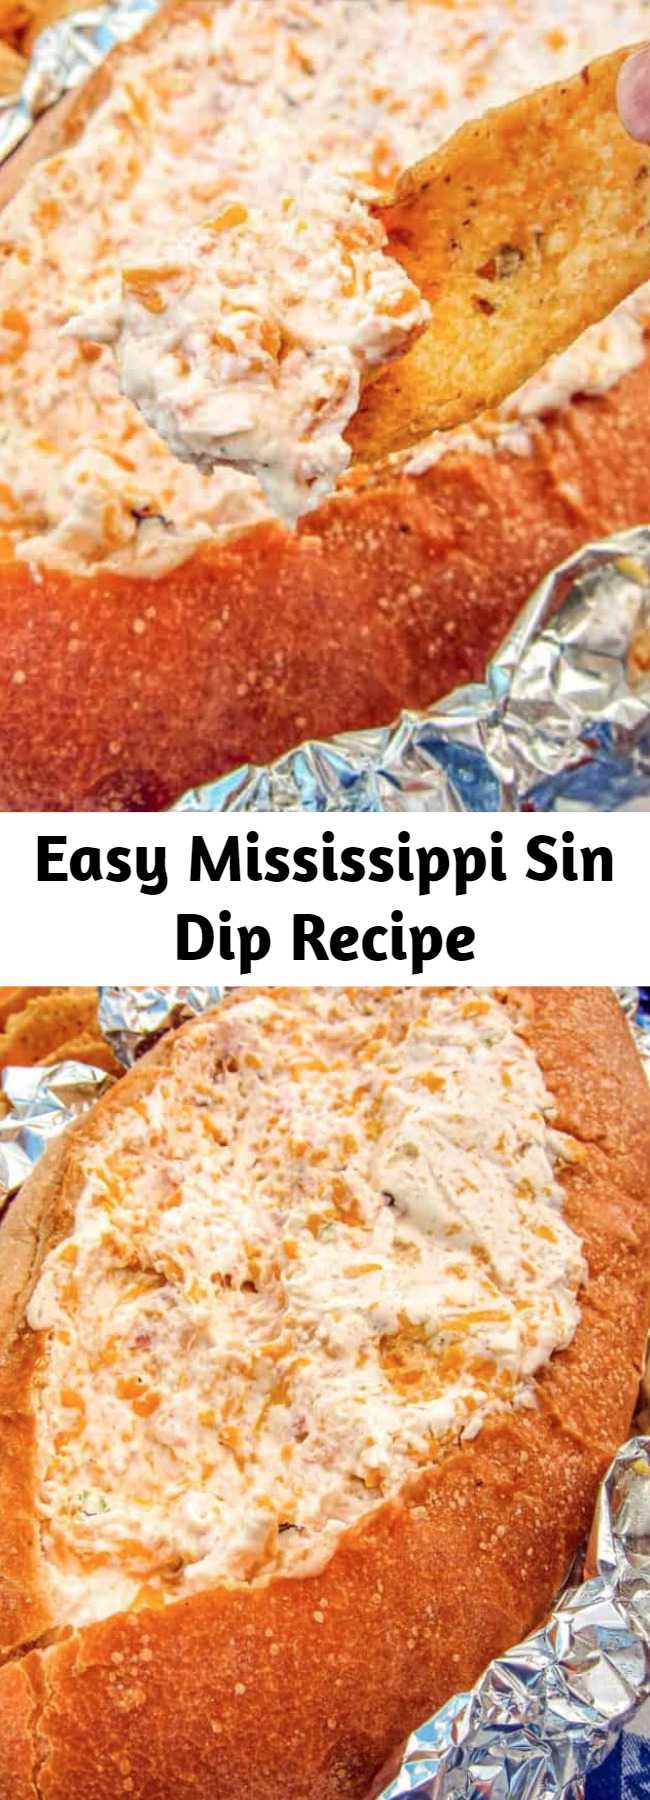 Easy Mississippi Sin Dip Recipe - ham, sour cream, cream cheese cheddar and ham baked in a bread bowl - SINFUL! There is never any left when I take this to a party! Everyone asks for the recipe. What's not to love???